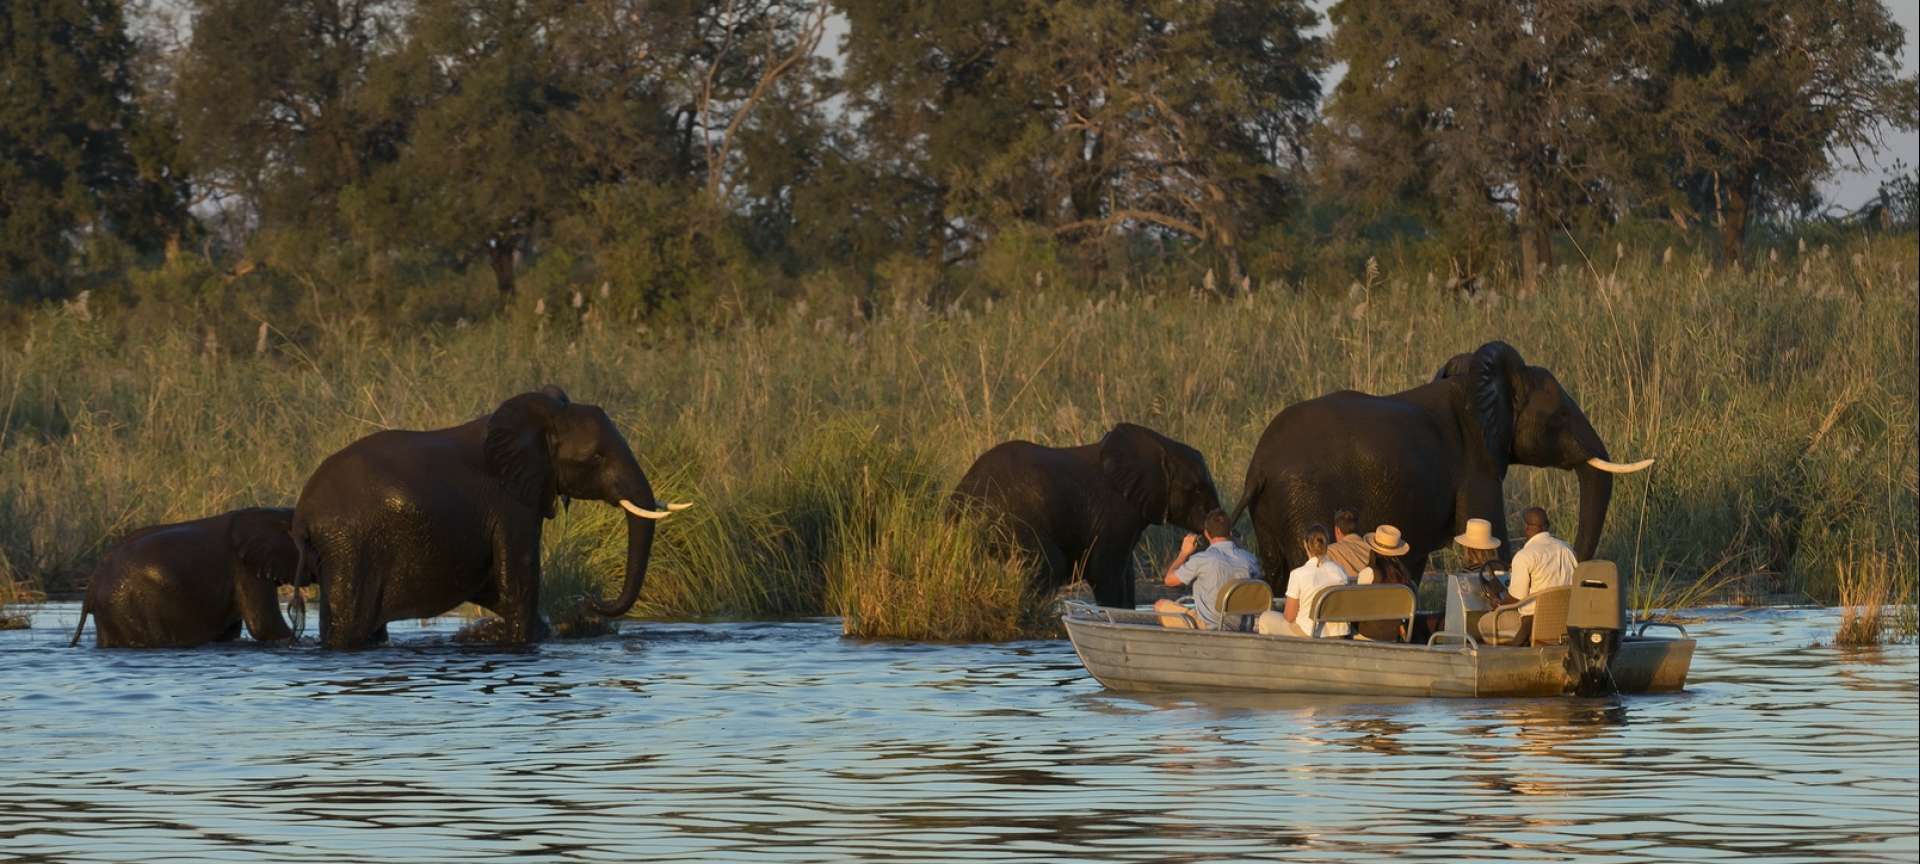 Early morning boat trips down or up the Zambezi river will offer unique views of the wading wildlife